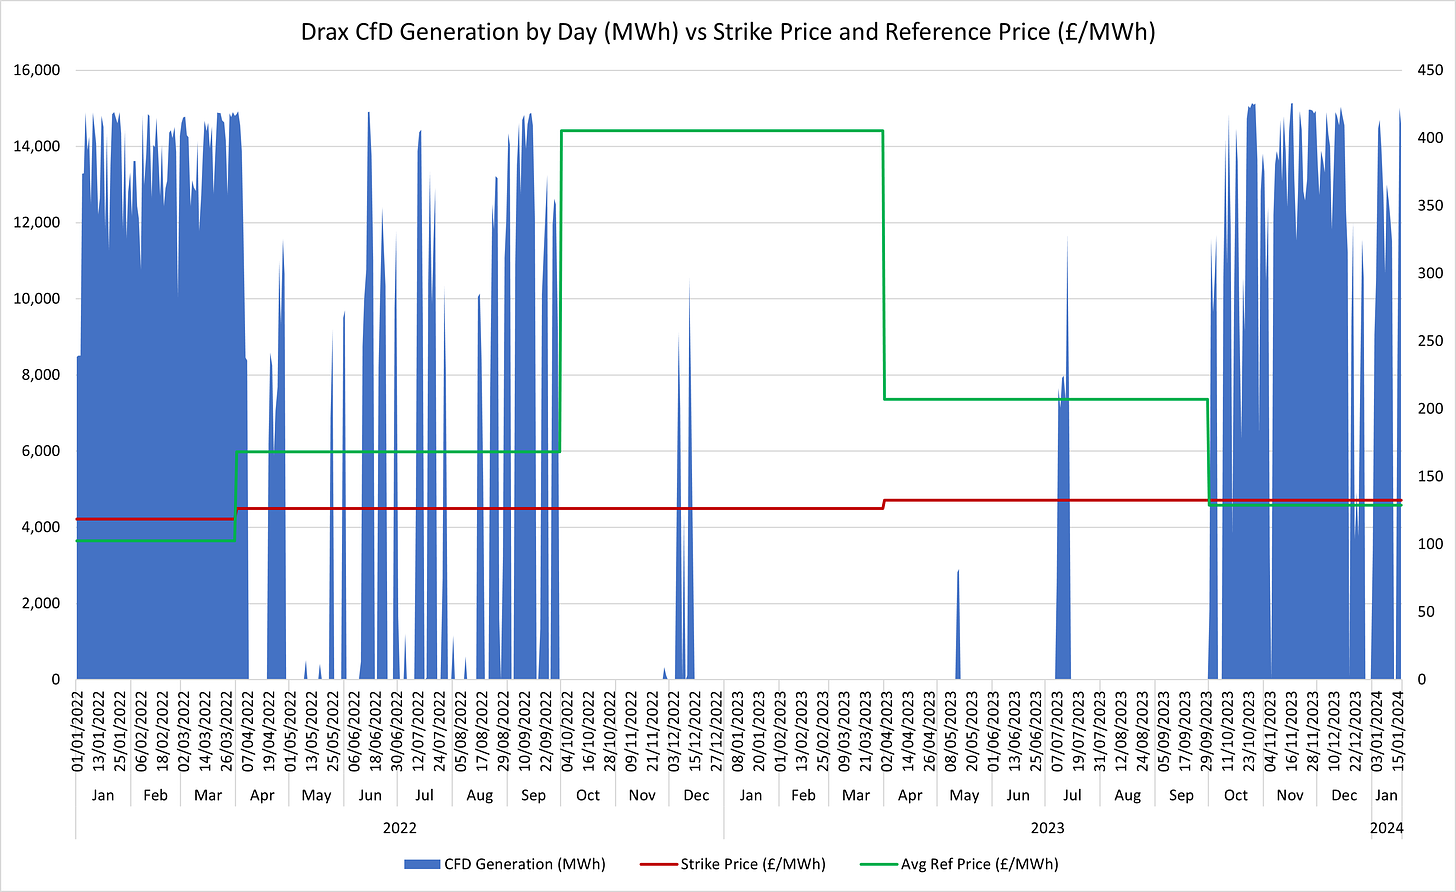 Figure 5 - Drax CfD Generation by day 2022-2024 (MWh) with Reference Price and Strike Price (£ per MWh)